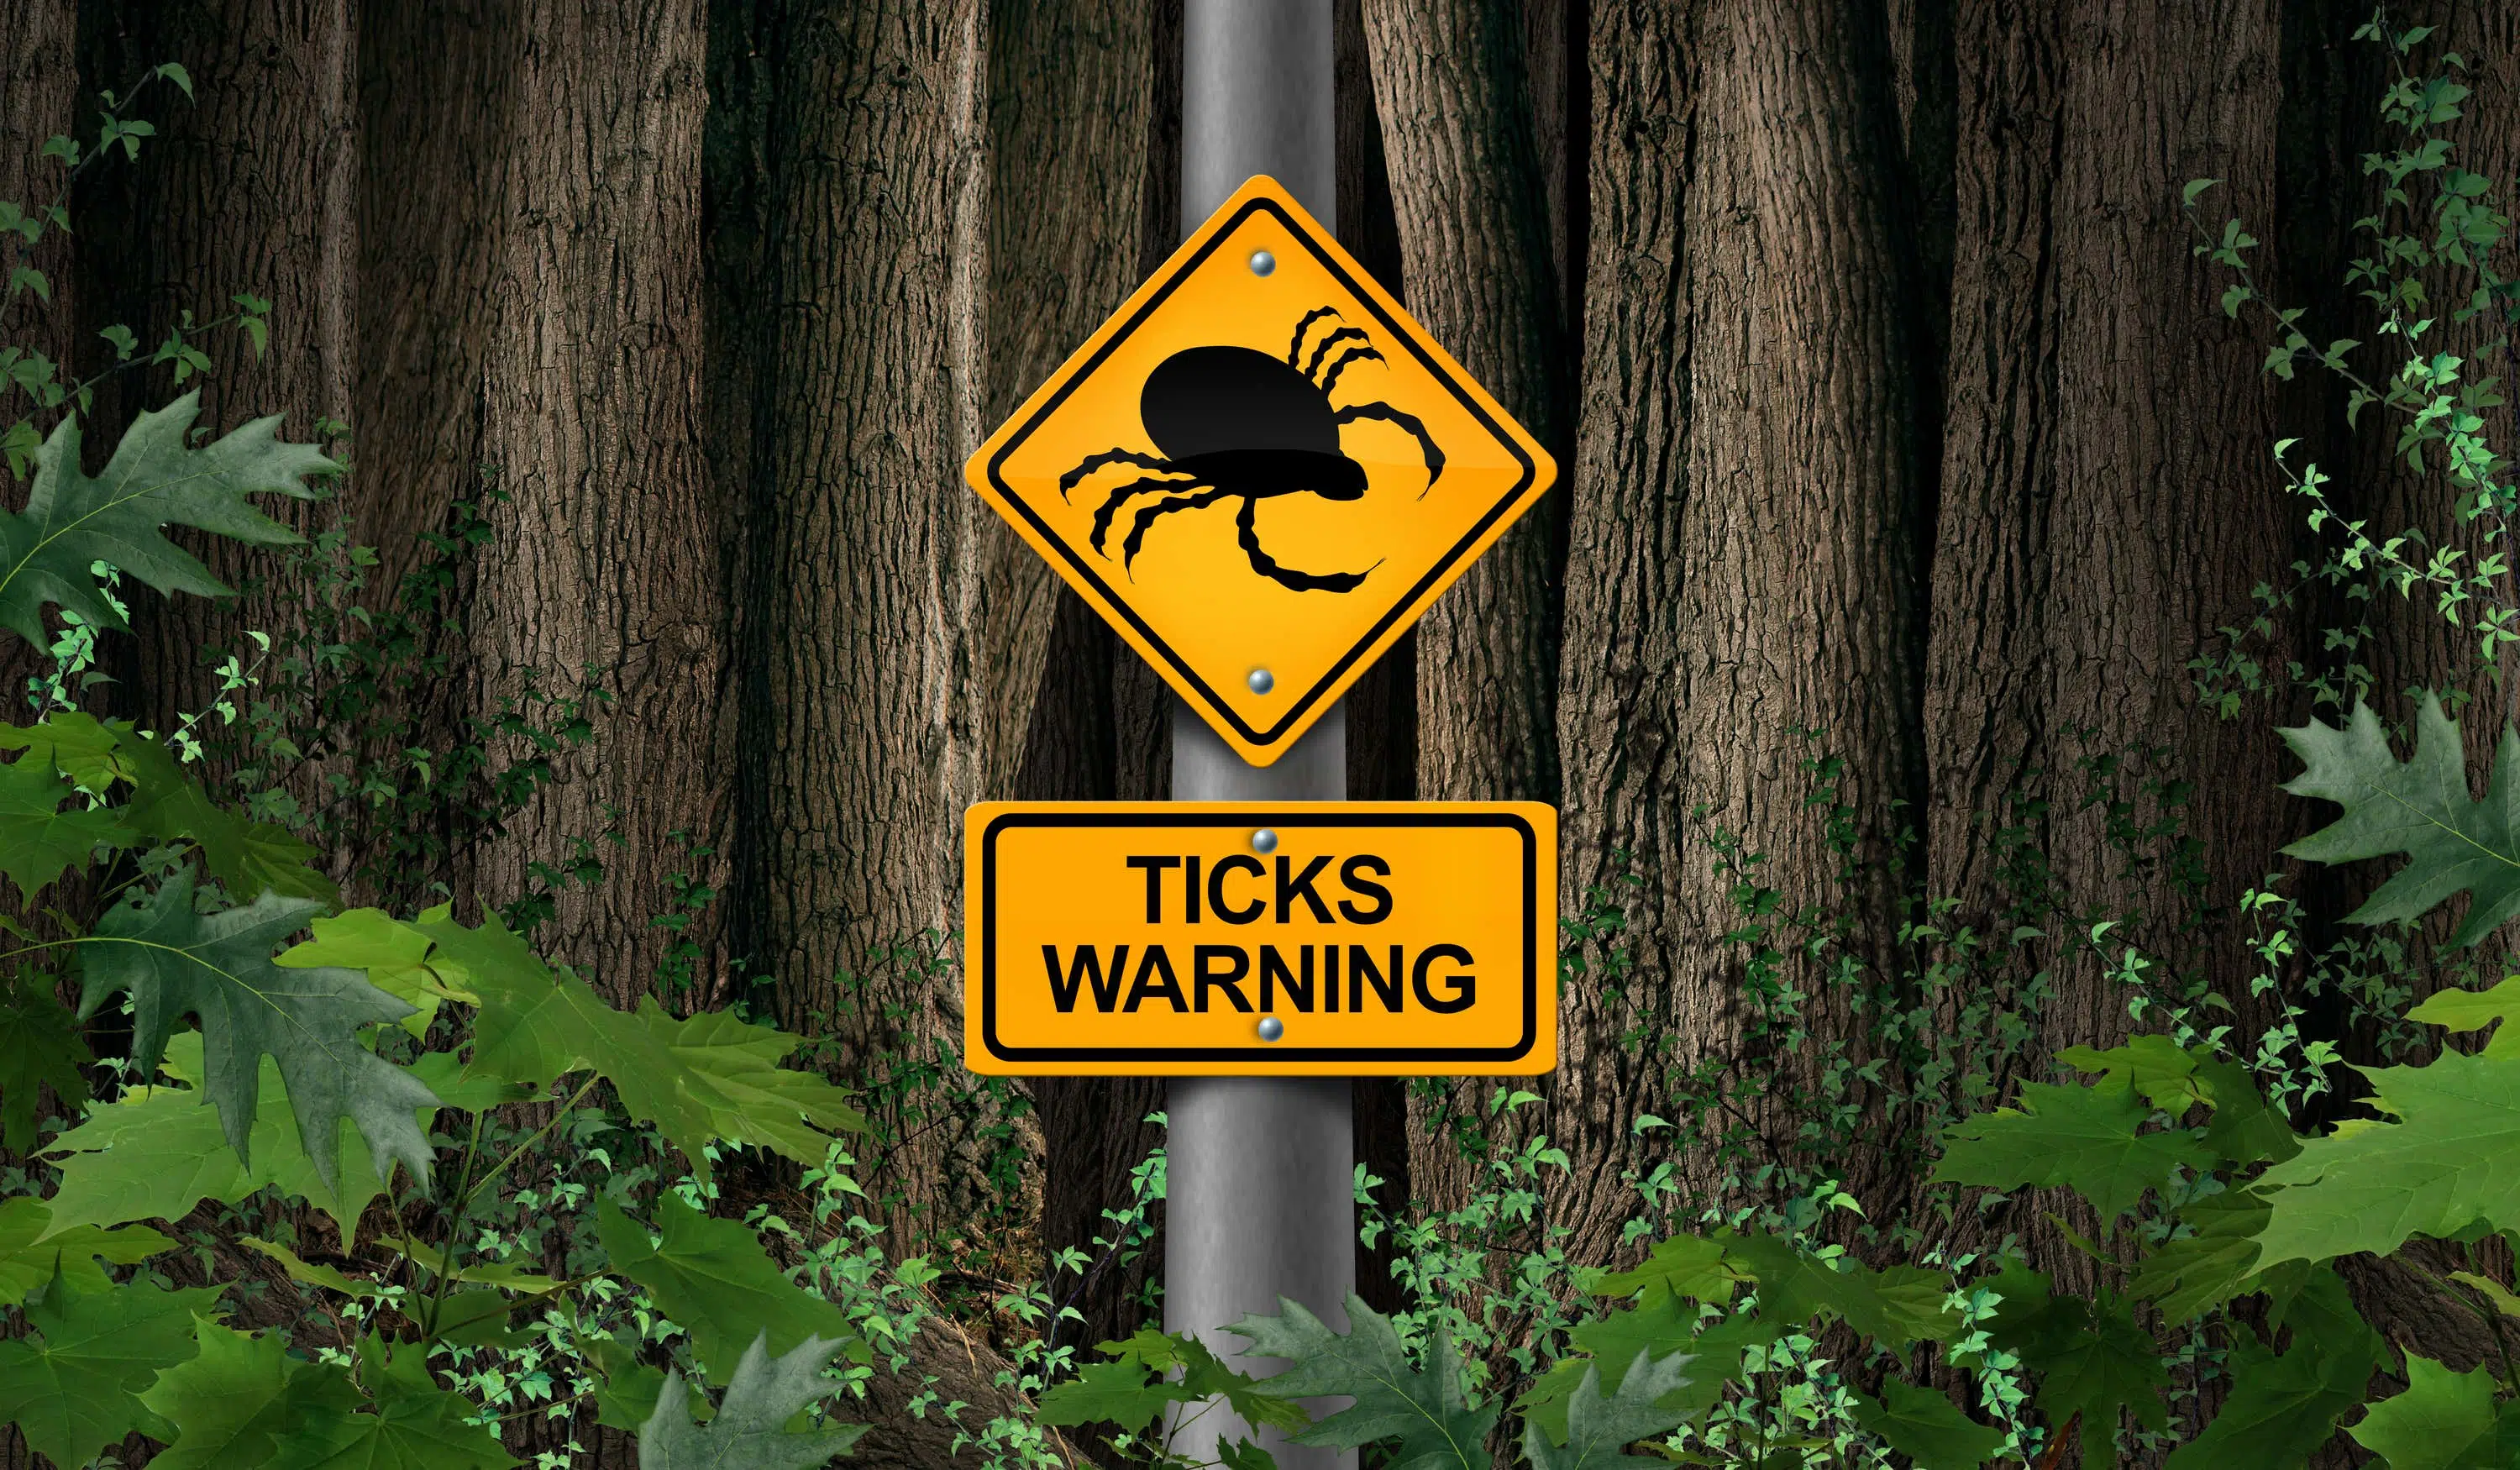 Ticks warning sign in forest scaled